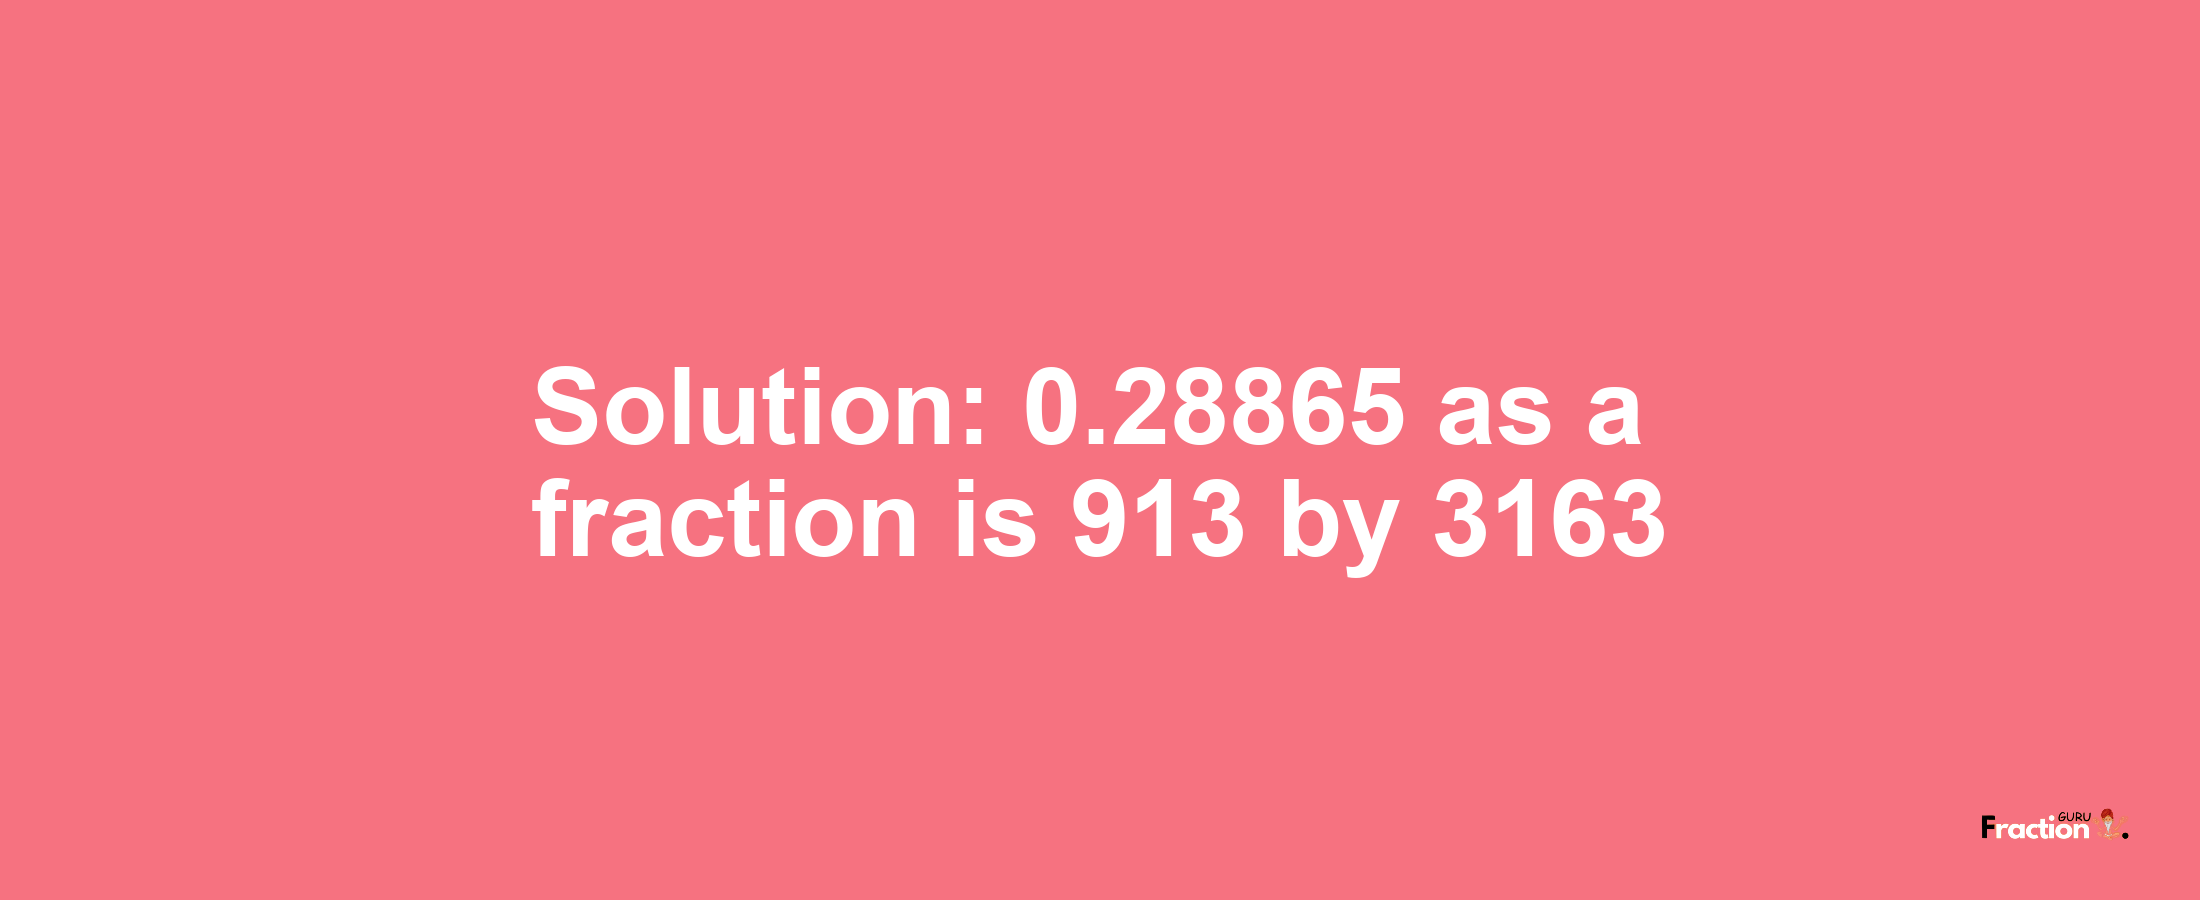 Solution:0.28865 as a fraction is 913/3163